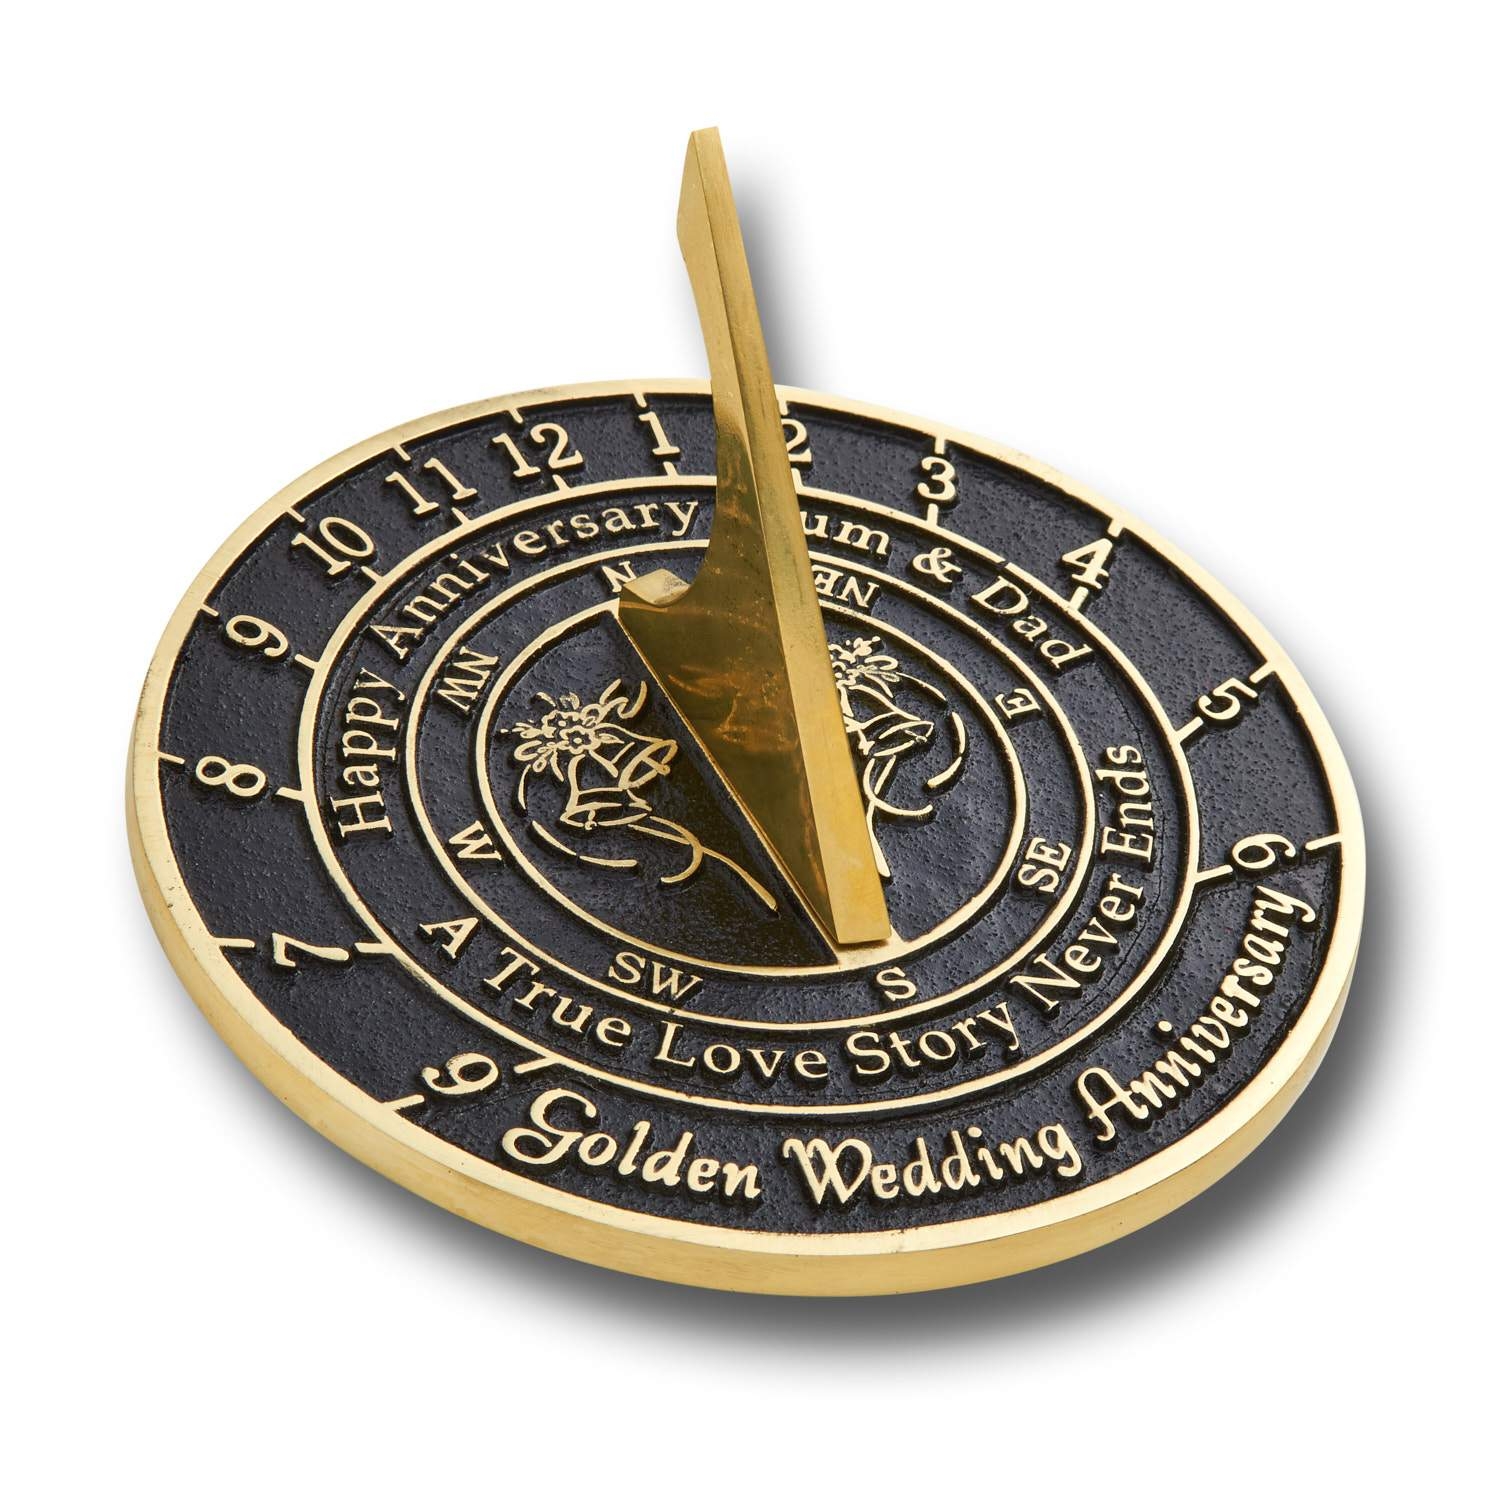 Custom Anniversary Sundial Gift Created In Solid English Brass With Your Message Cast In The Very Metal Itself. – Regular